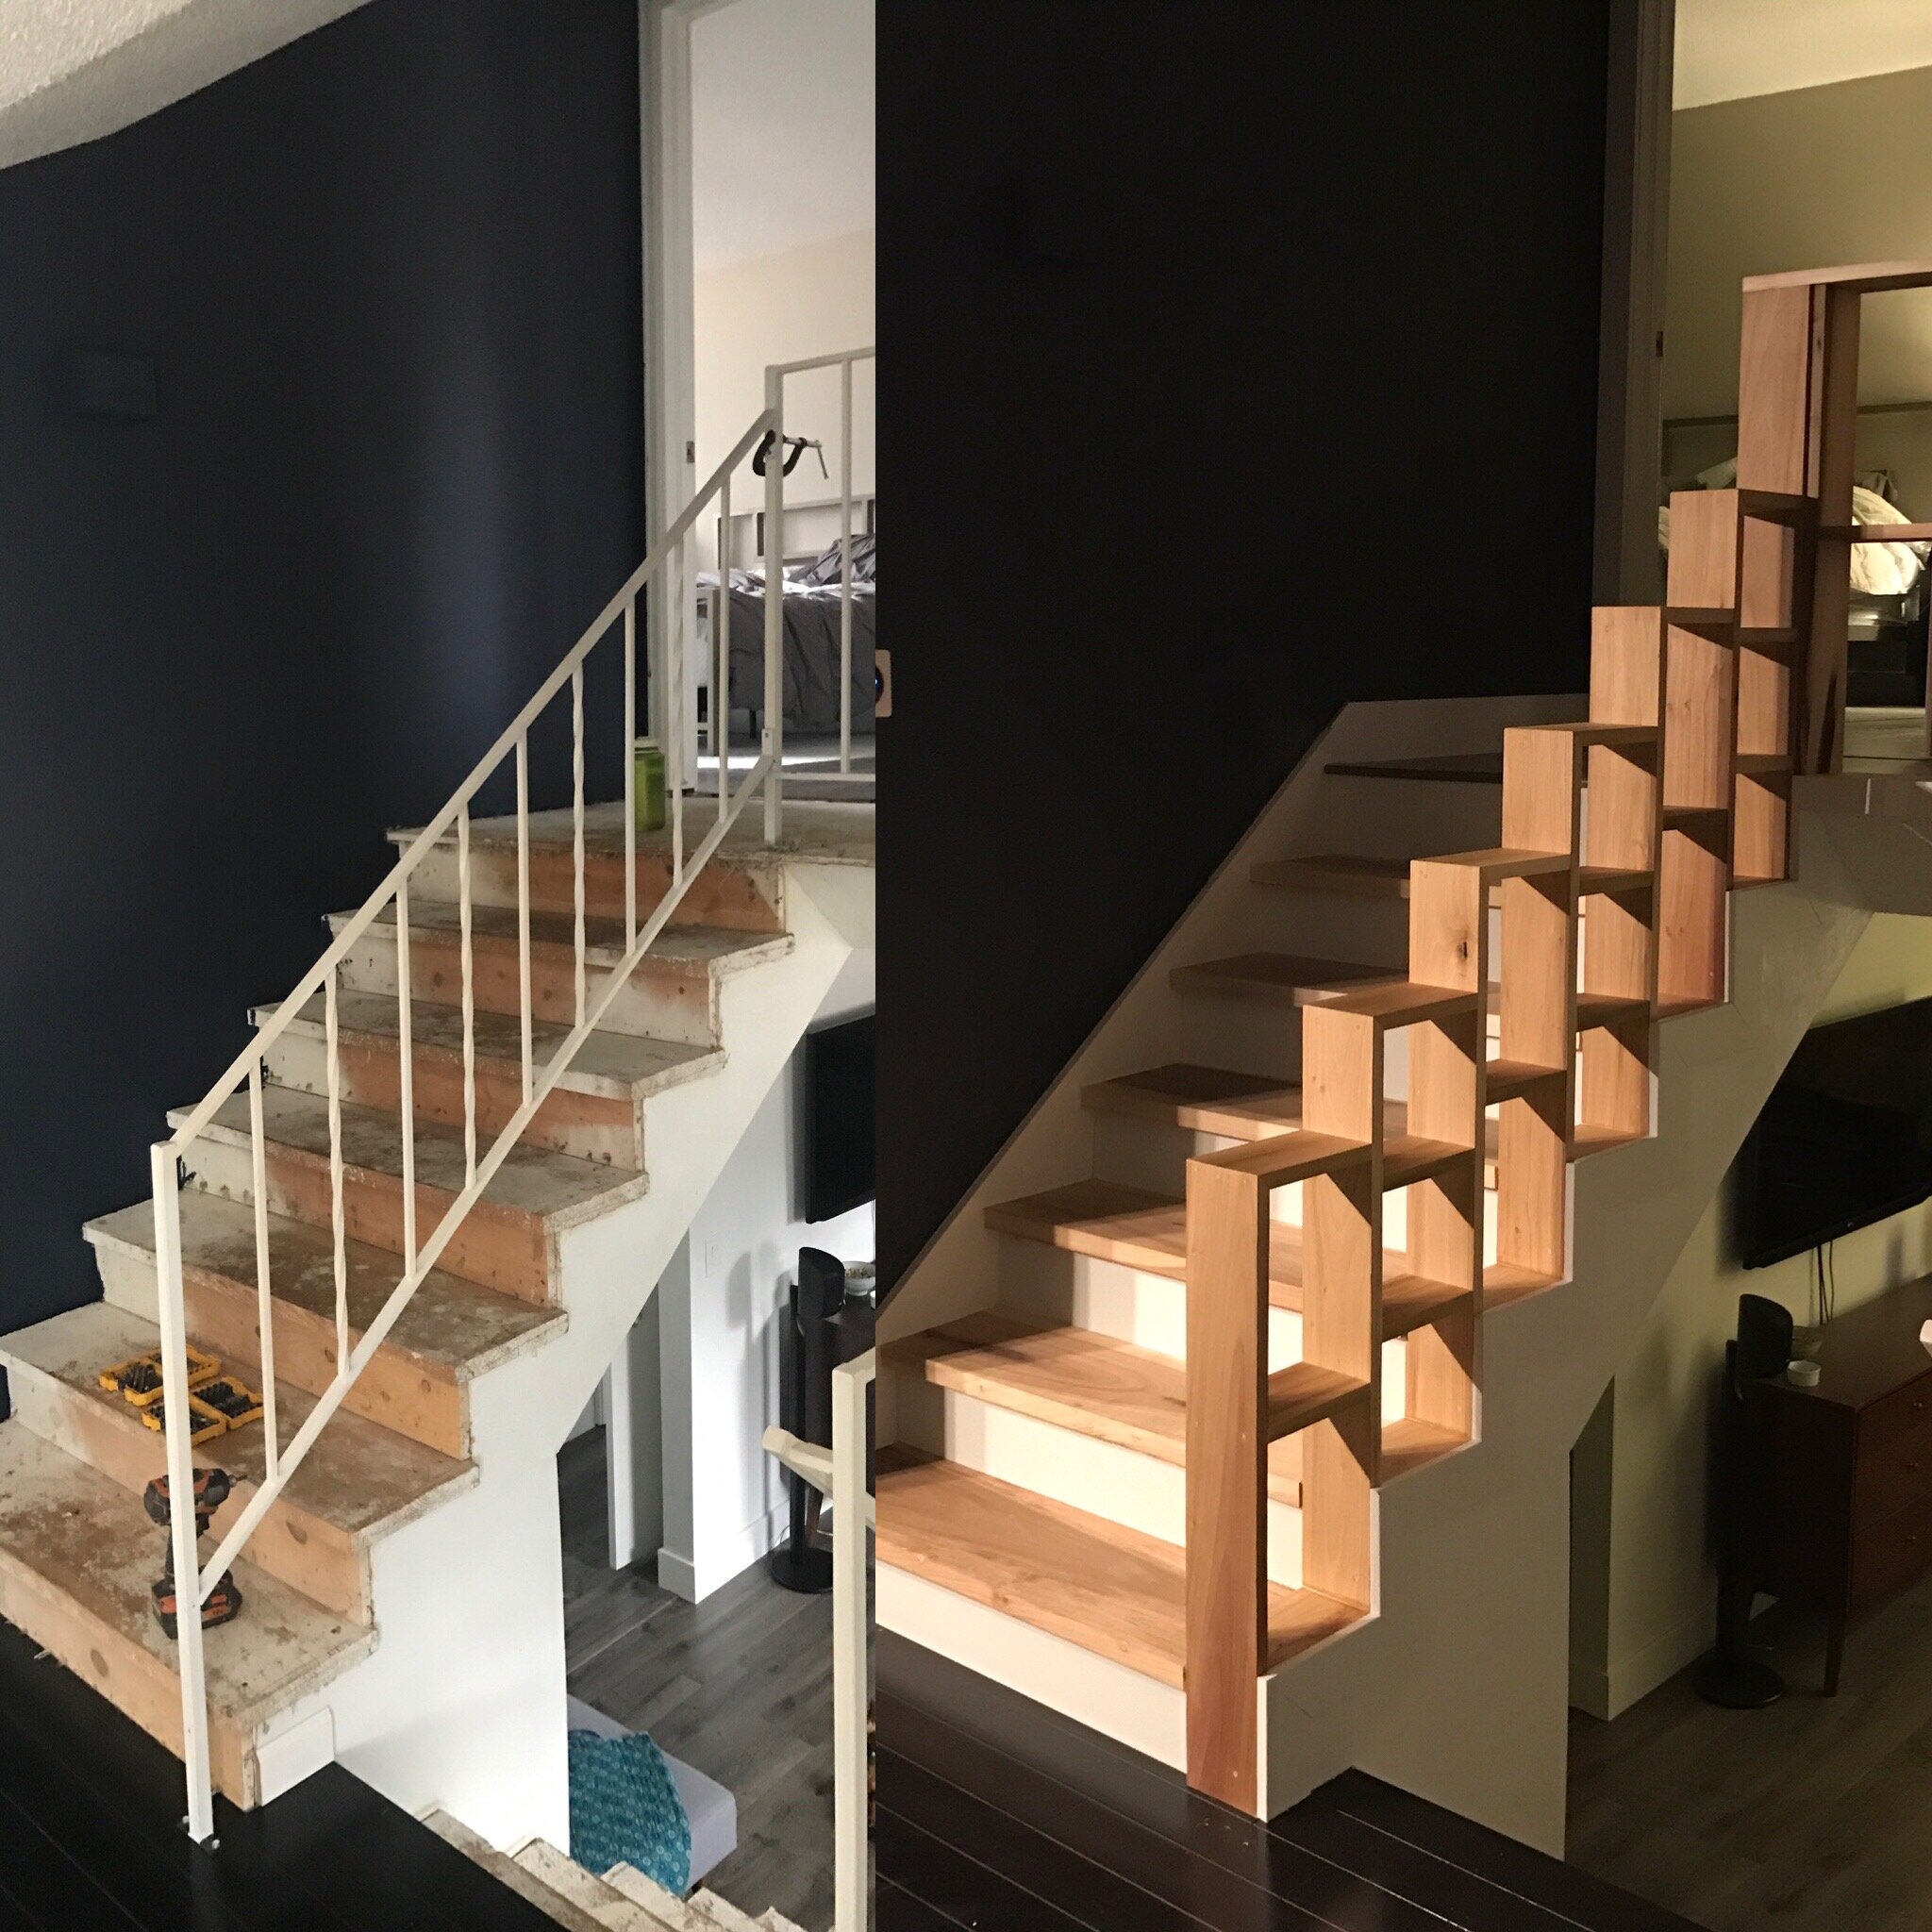  Unfinished, previously carpeted stairs with an outdoor railing inside?! I think not! Upgrade to custom poplar stairs and a matching poplar bookshelf stair railing. 